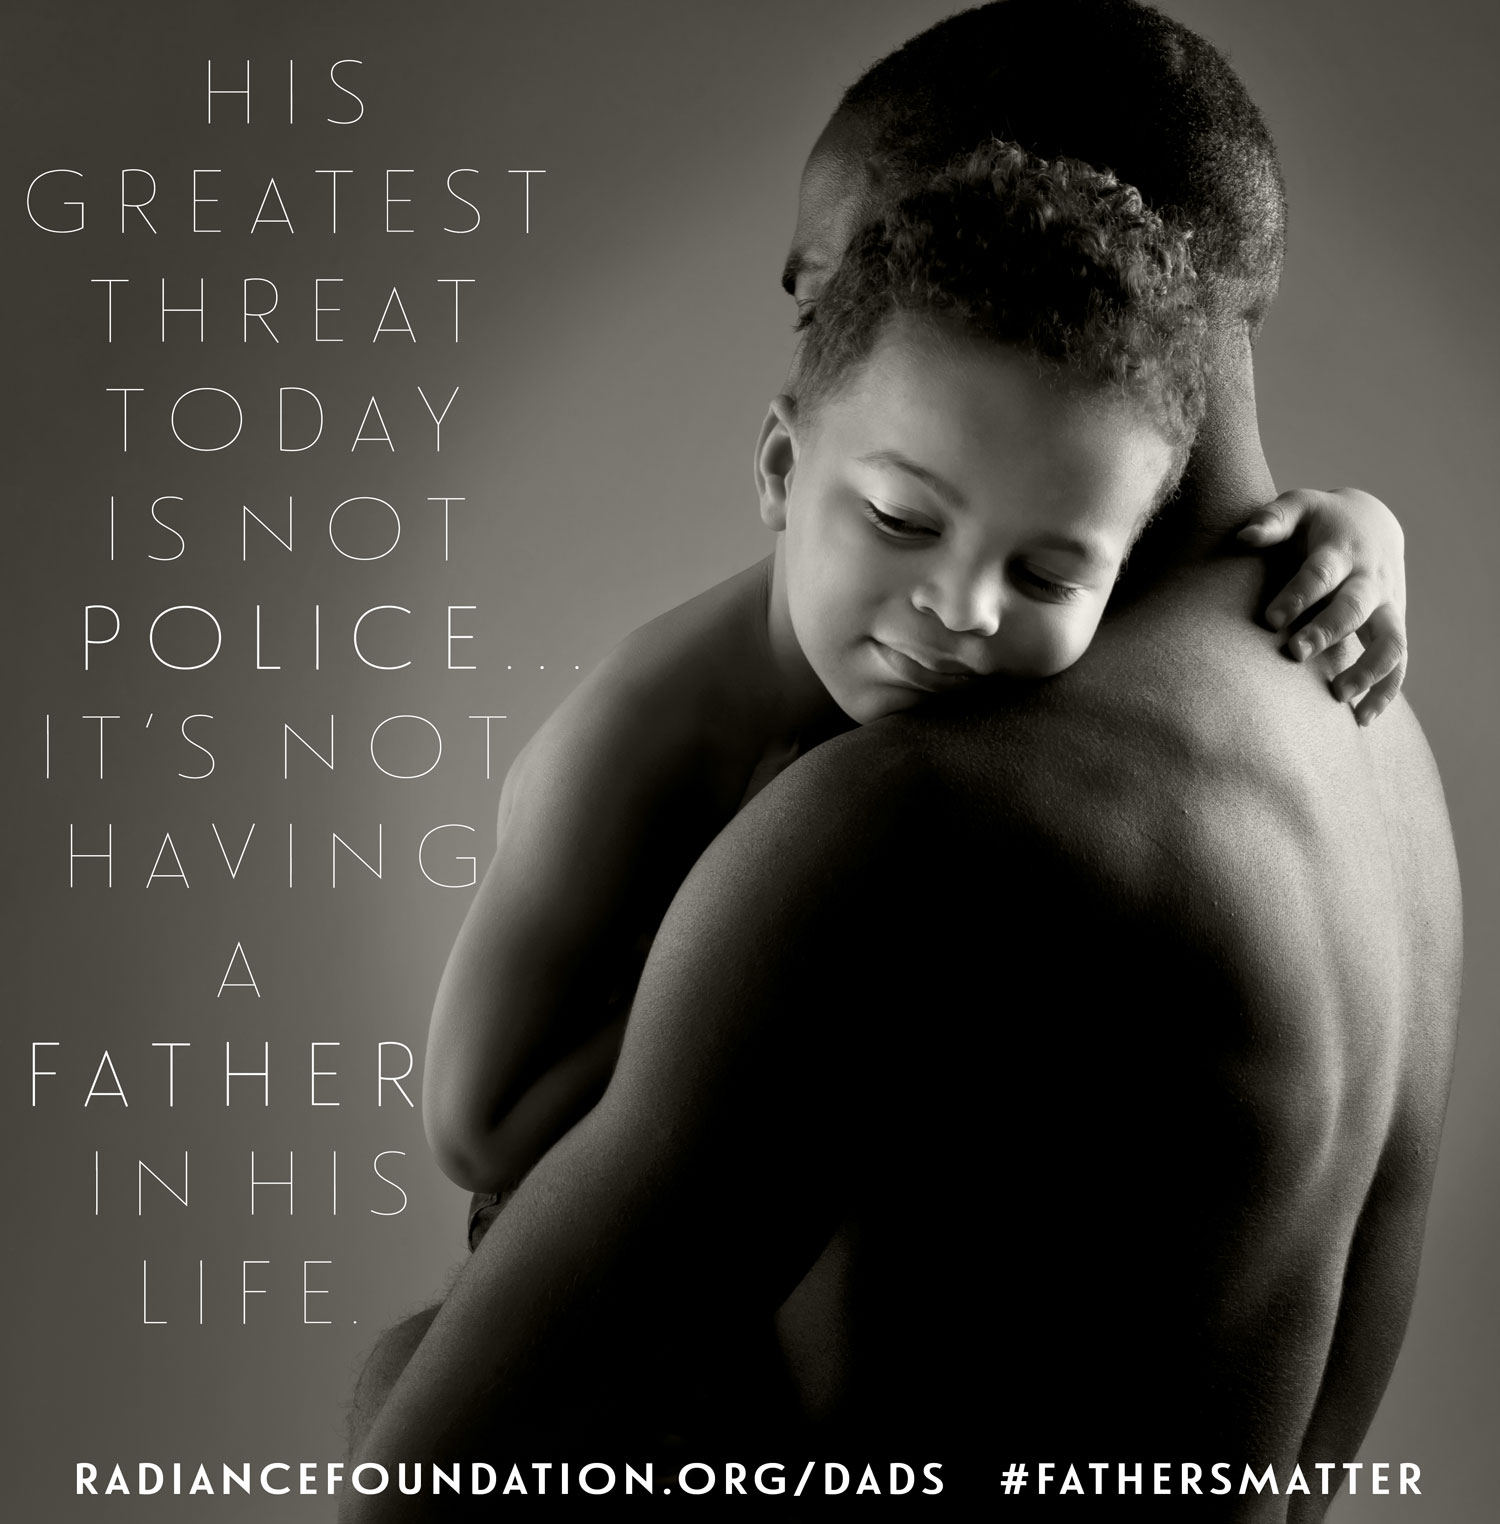 "His Biggest Threat" by The Radiance Foundation